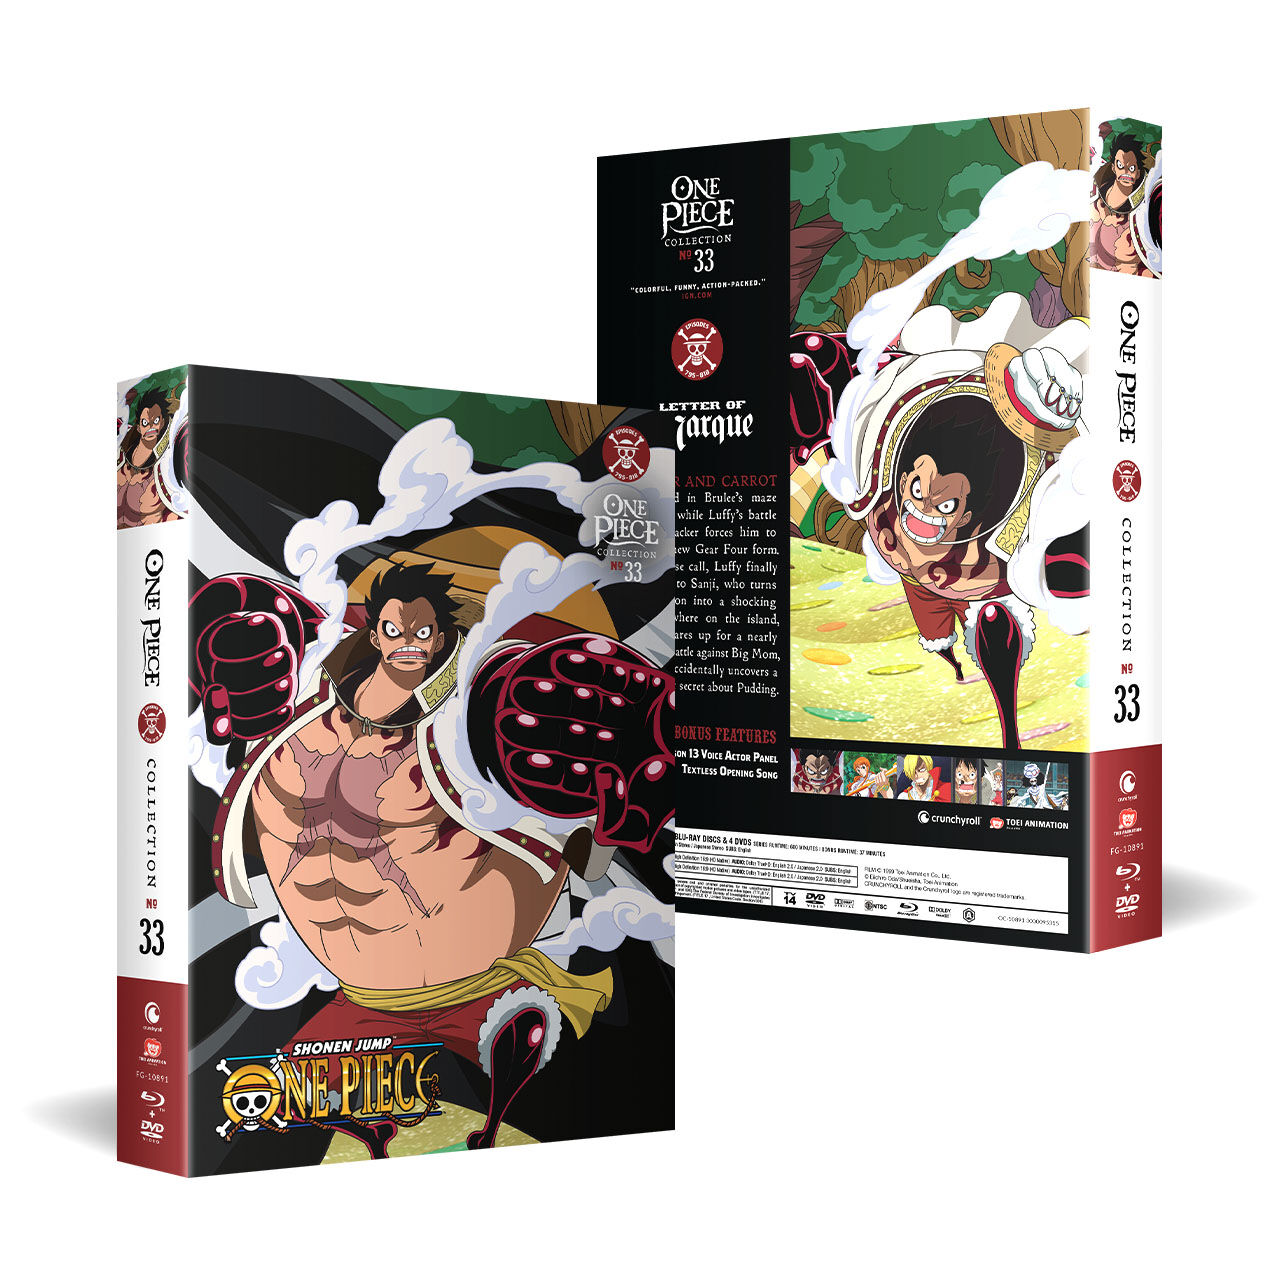 One Piece - Collection 33 - Blu-ray + DVD | Crunchyroll Store